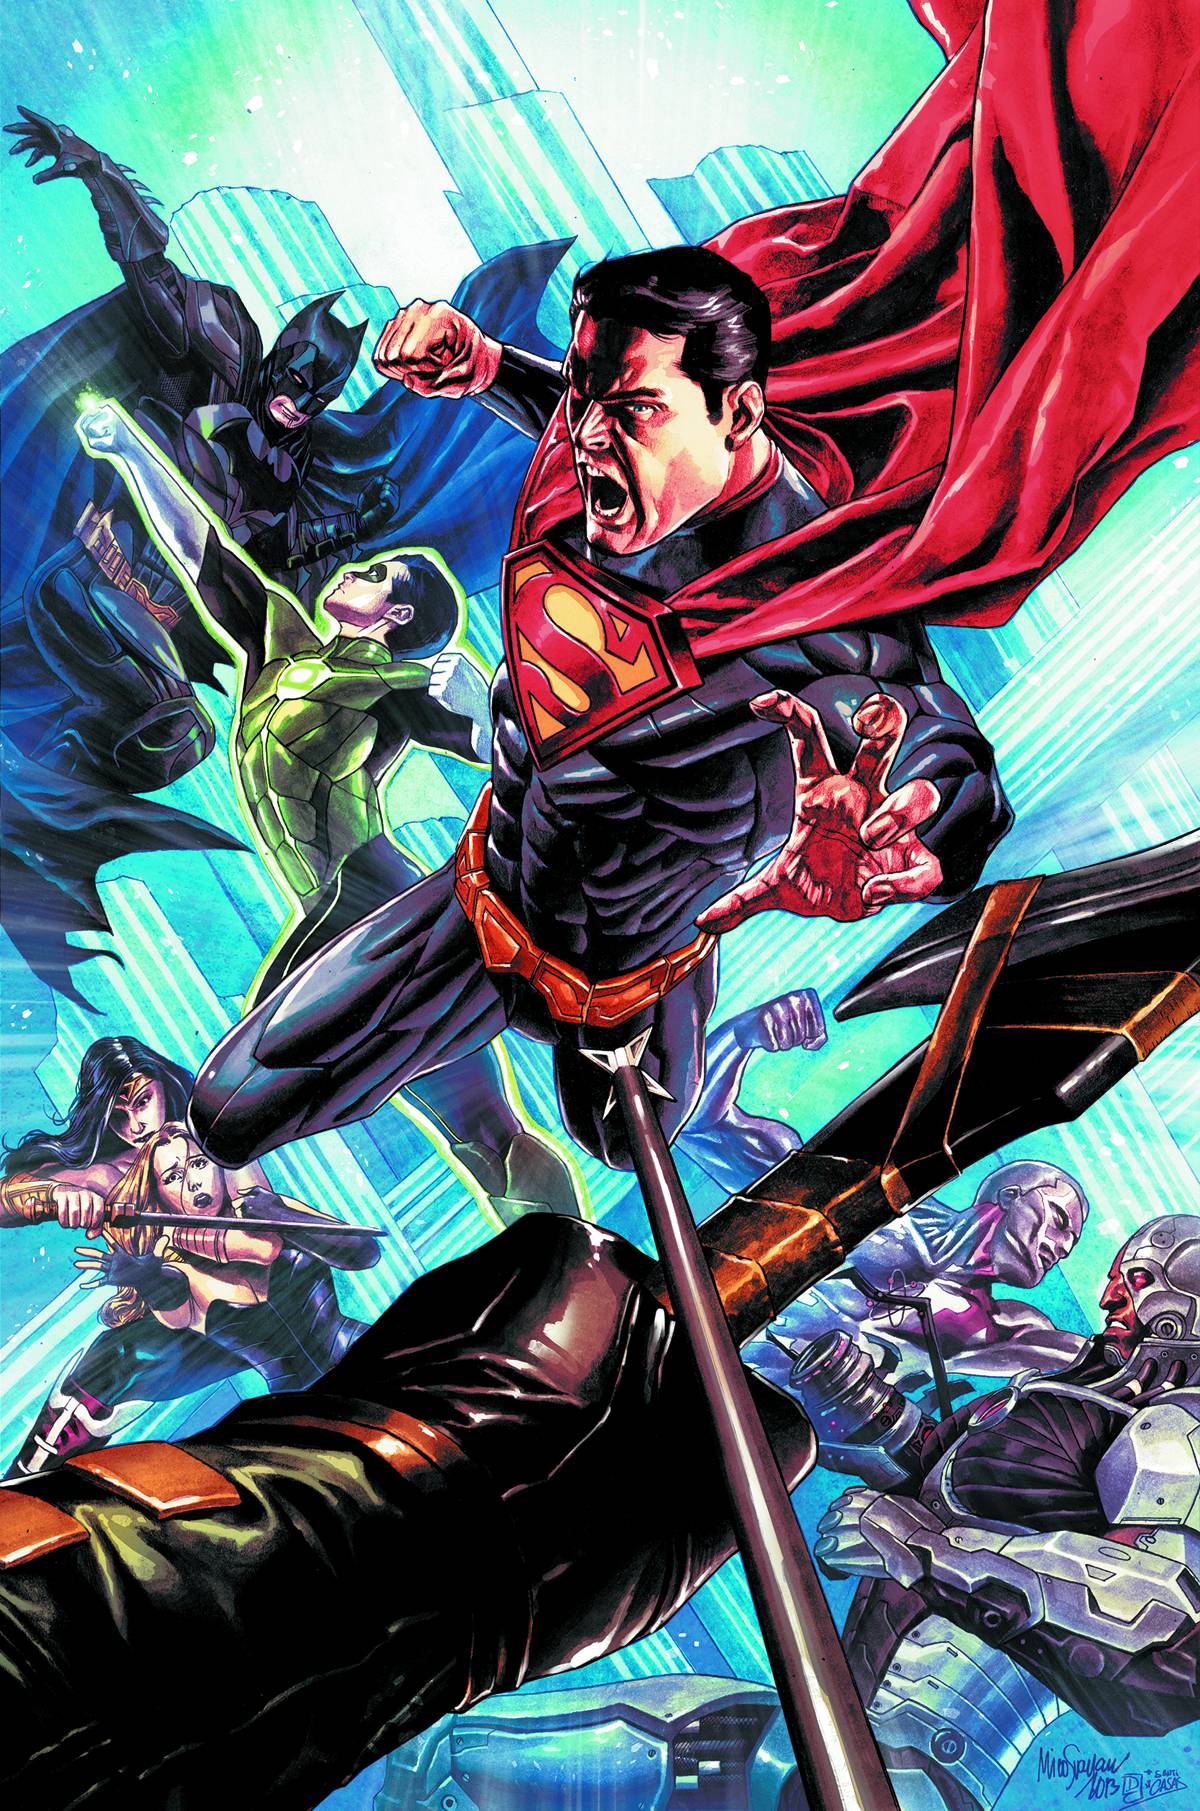 Injustice Gods Among Us #11 Variant Edition